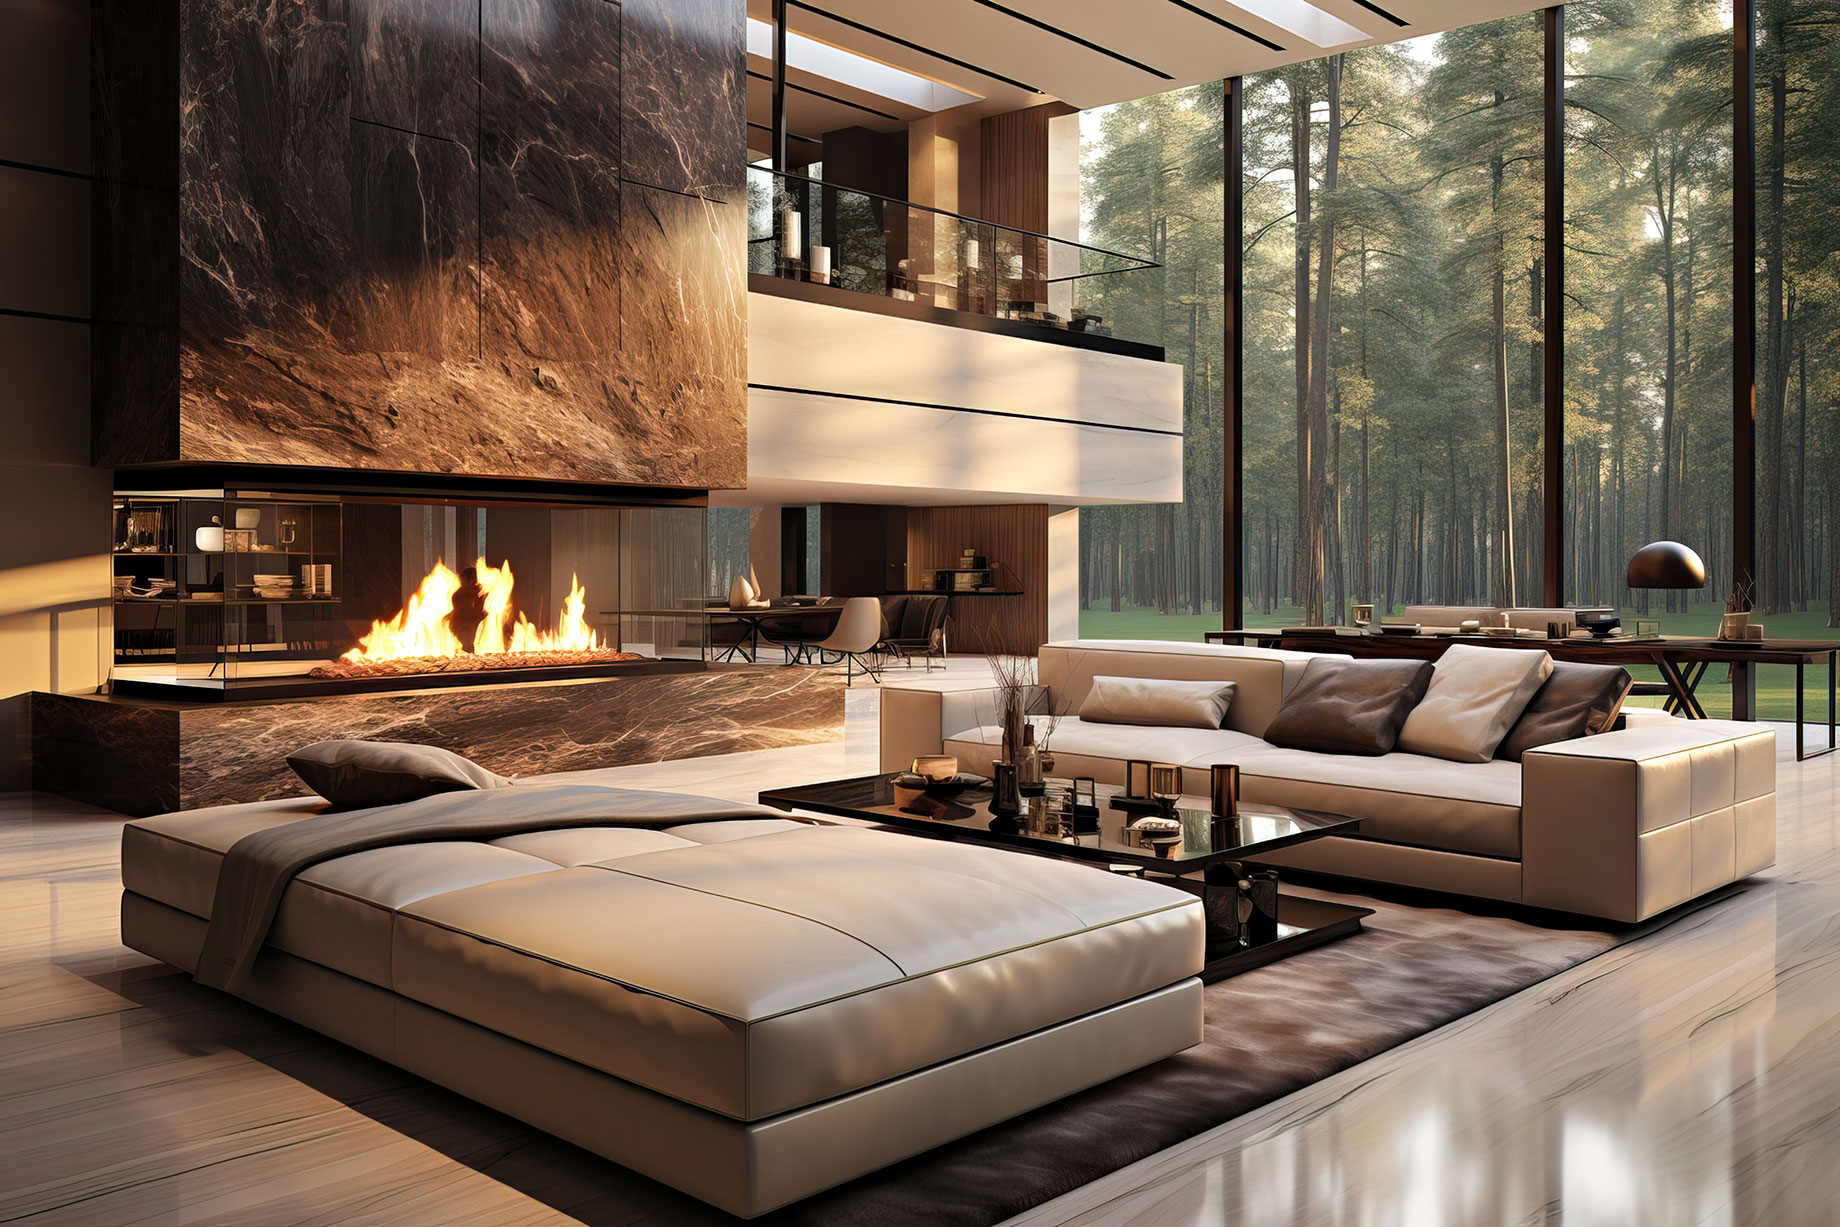 Textured Narratives - Luxury High-Ceiling Living Room, Large Couches, Tall Stone Fireplace, and Forest View